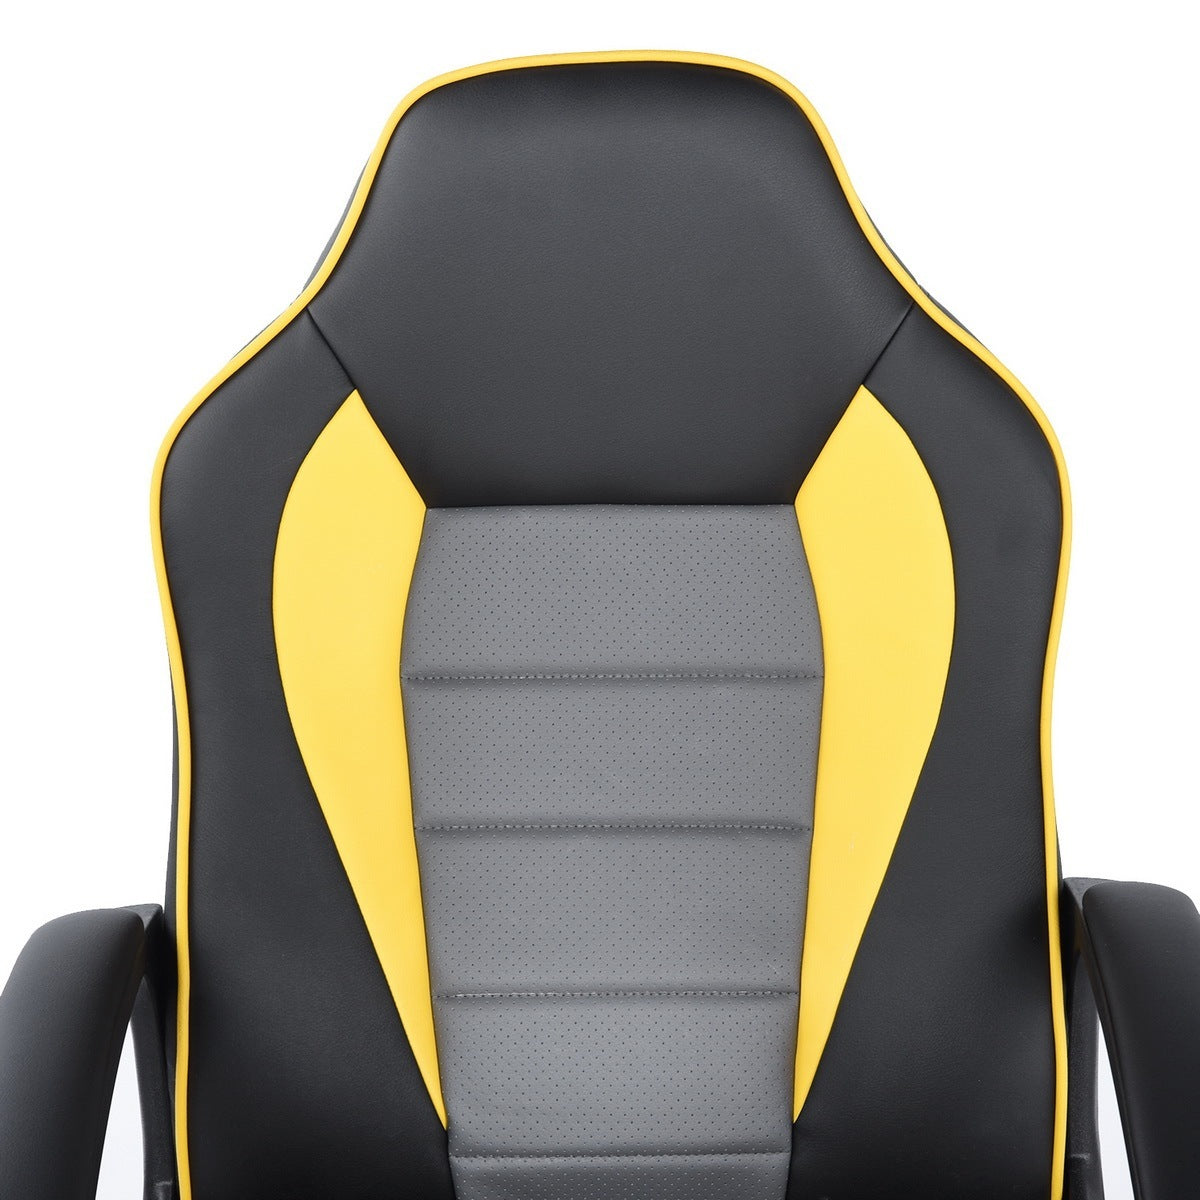 Gaming Office Chair with Fabric Adjustable Swivel (Black/Yellow)